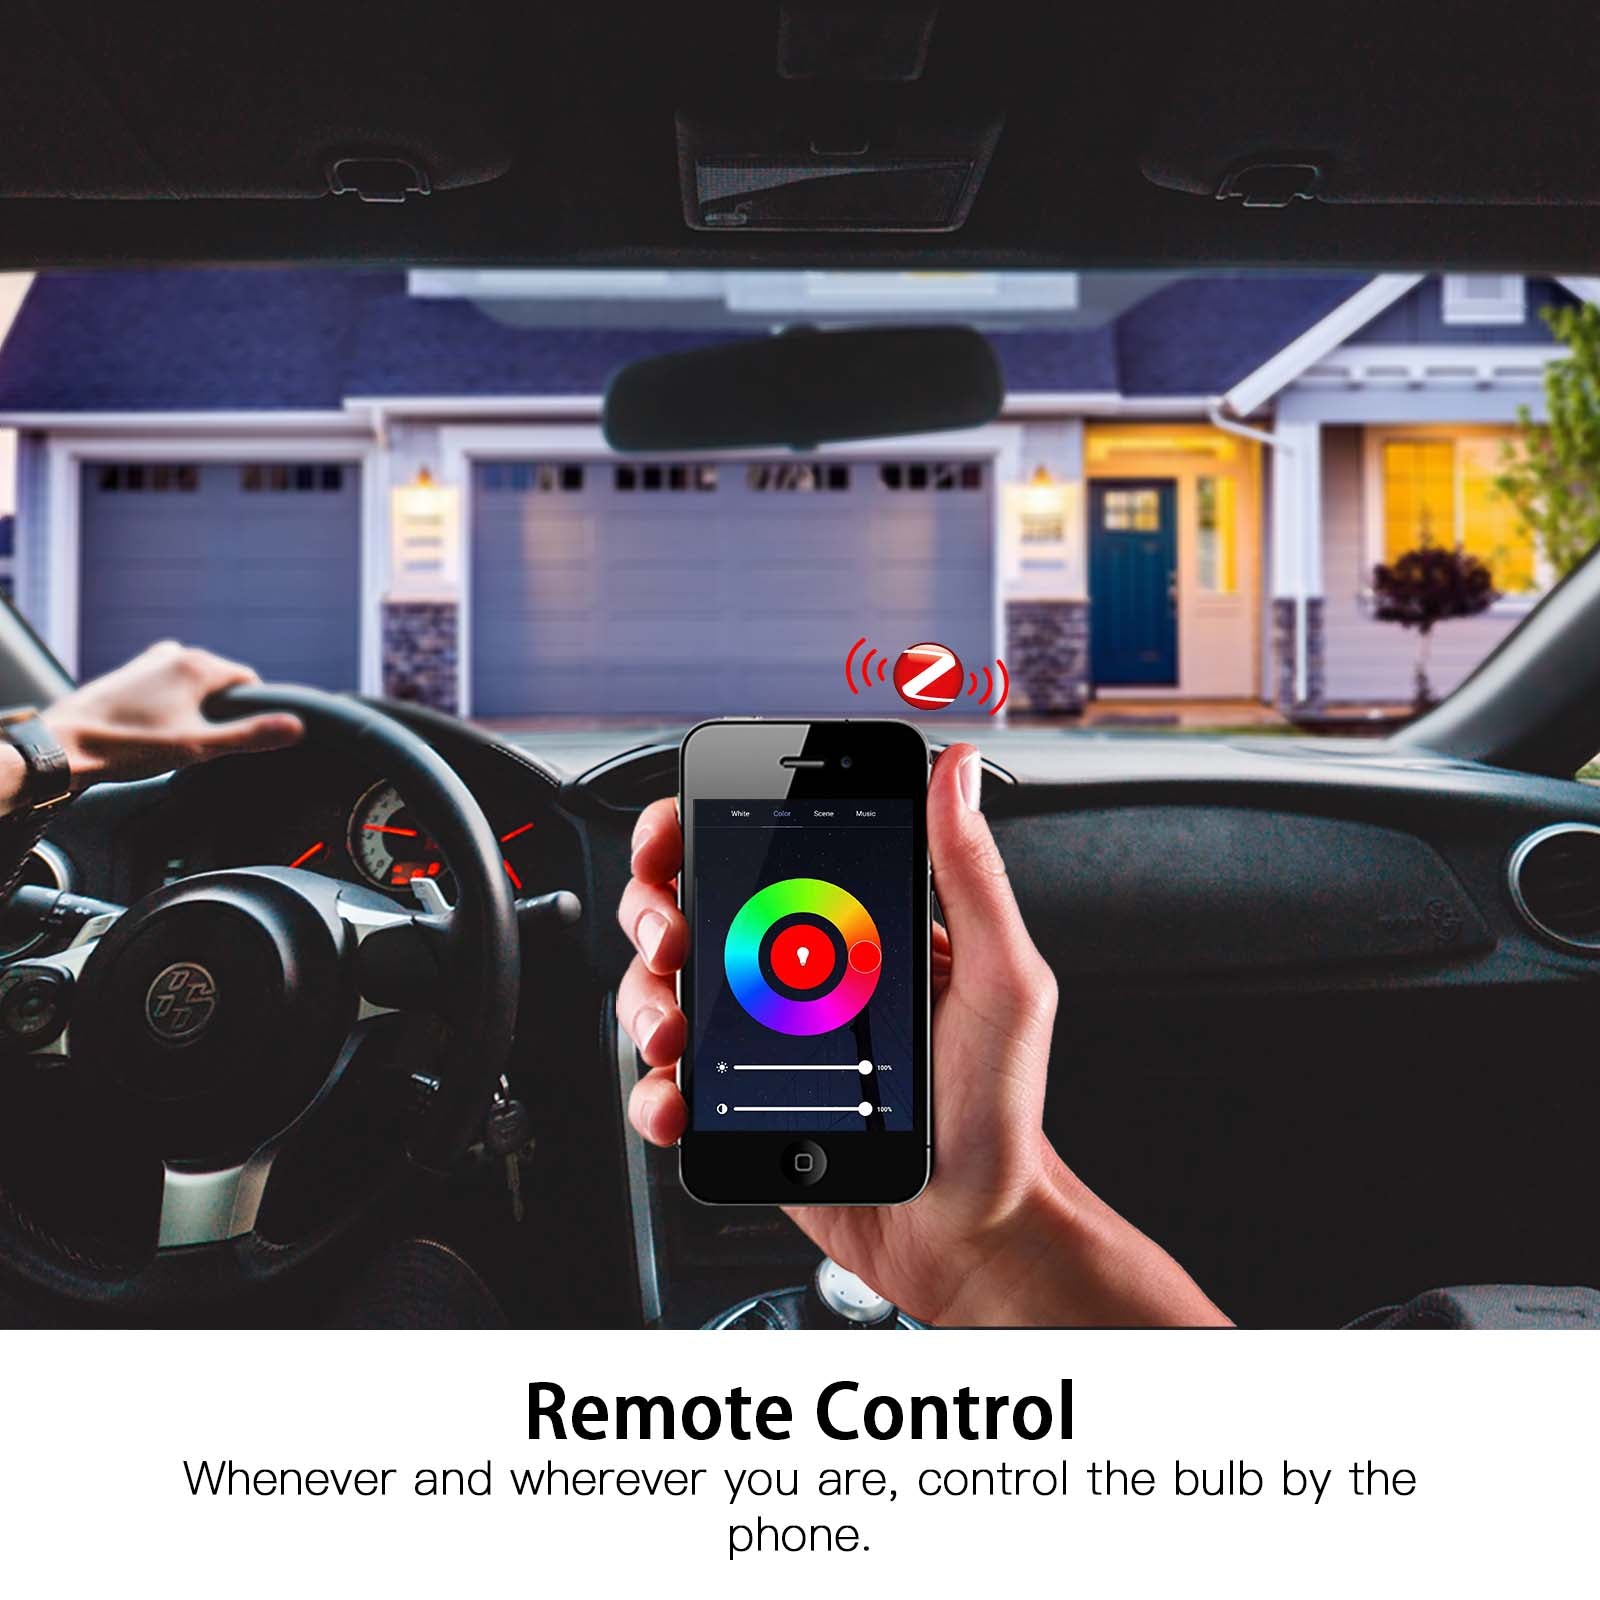 remote control, whenever and wherever you are, control the bulb by the phone. - MOES